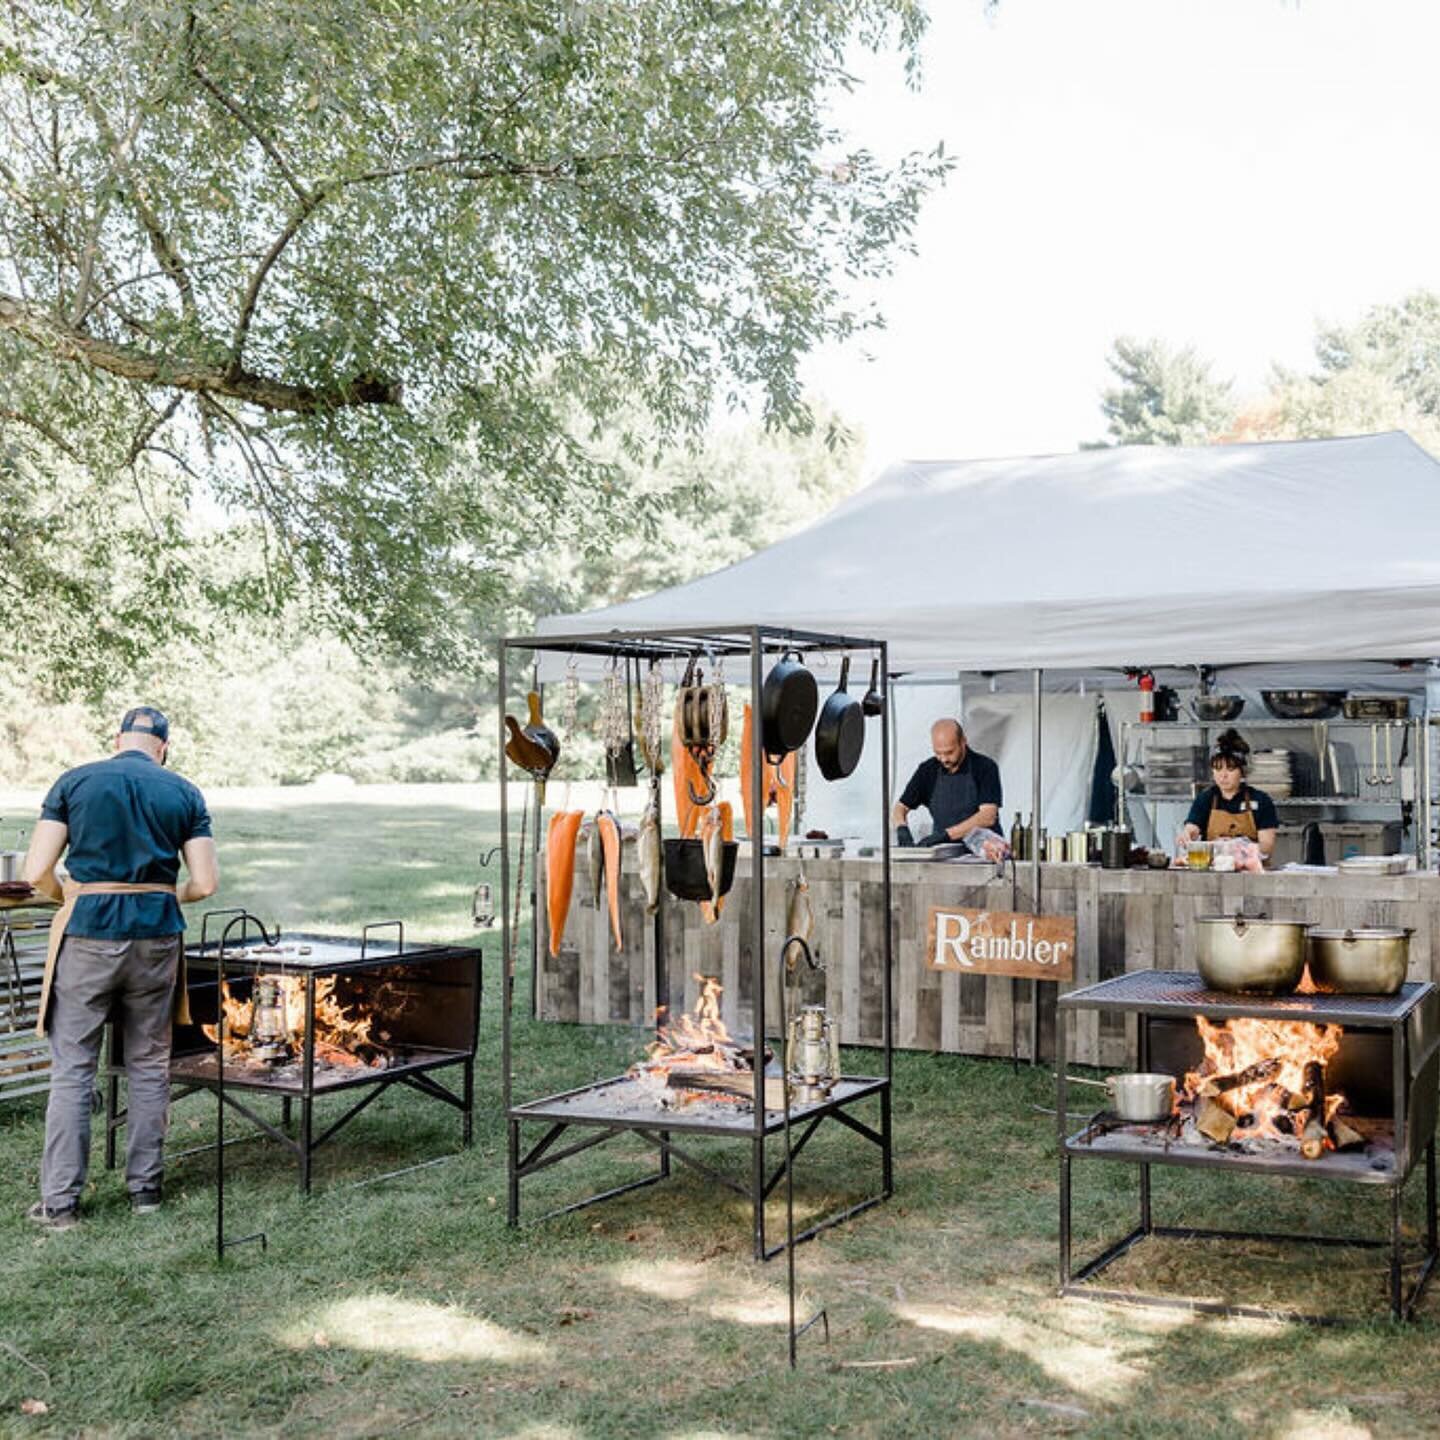 Rambler crafts memorable, lasting culinary experiences through both public events and immersive private events &amp; catering. Utilizing live-fire cooking, our seasonal menus are crafted using fresh, locally sourced ingredients with an emphasis on th